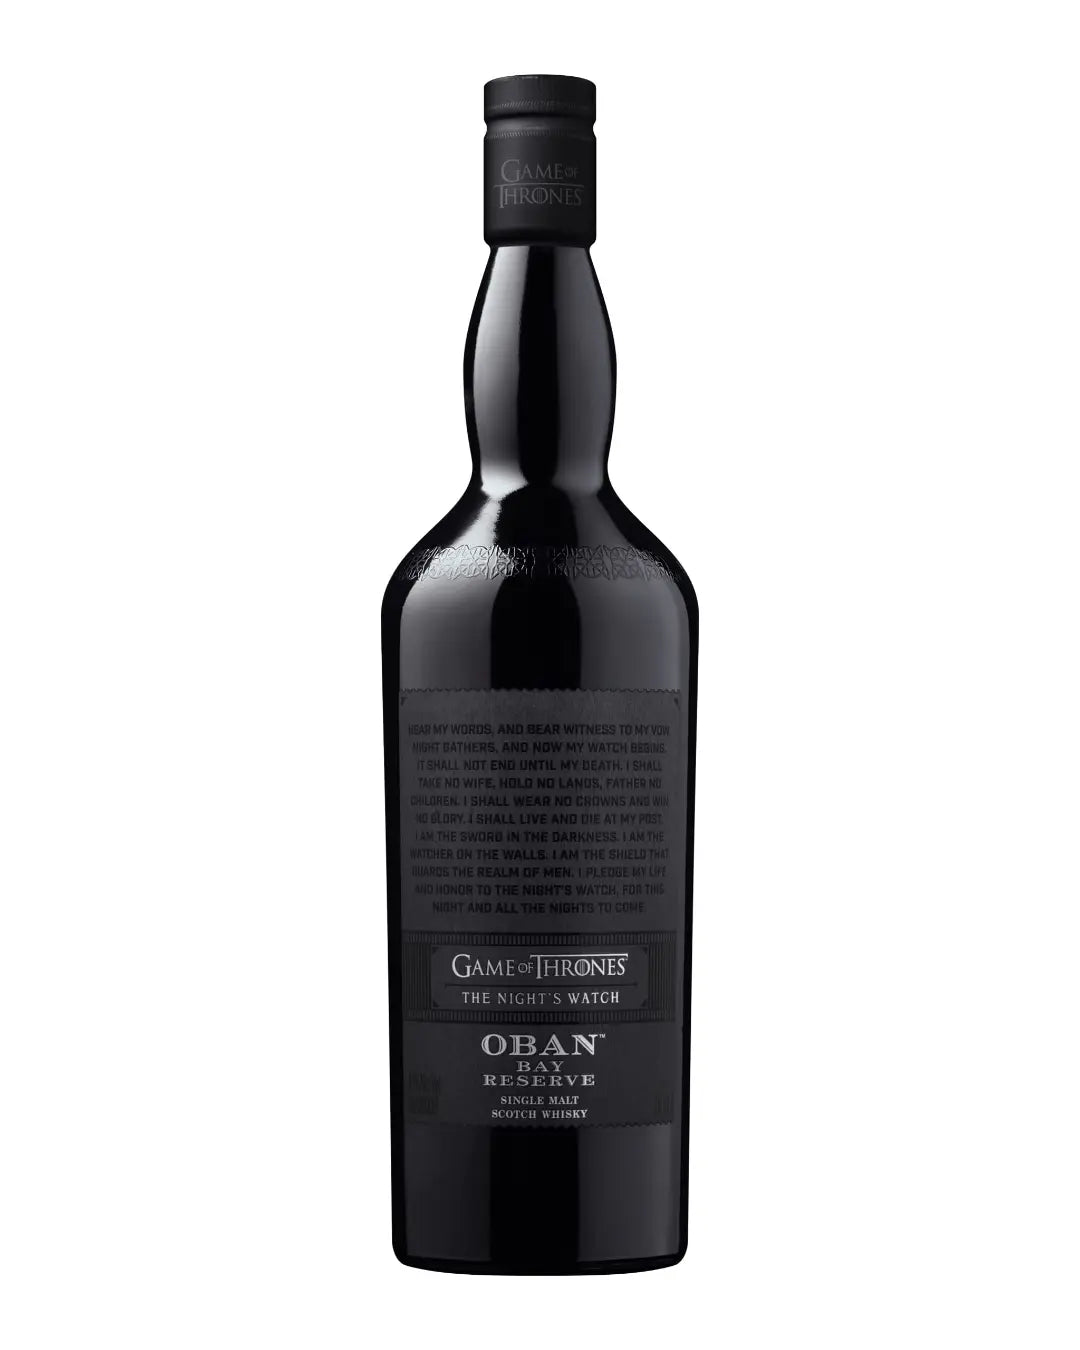 Game of Thrones Night's Watch - Oban Bay Reserve Malt Whisky, 70 cl Whisky 5000267173795